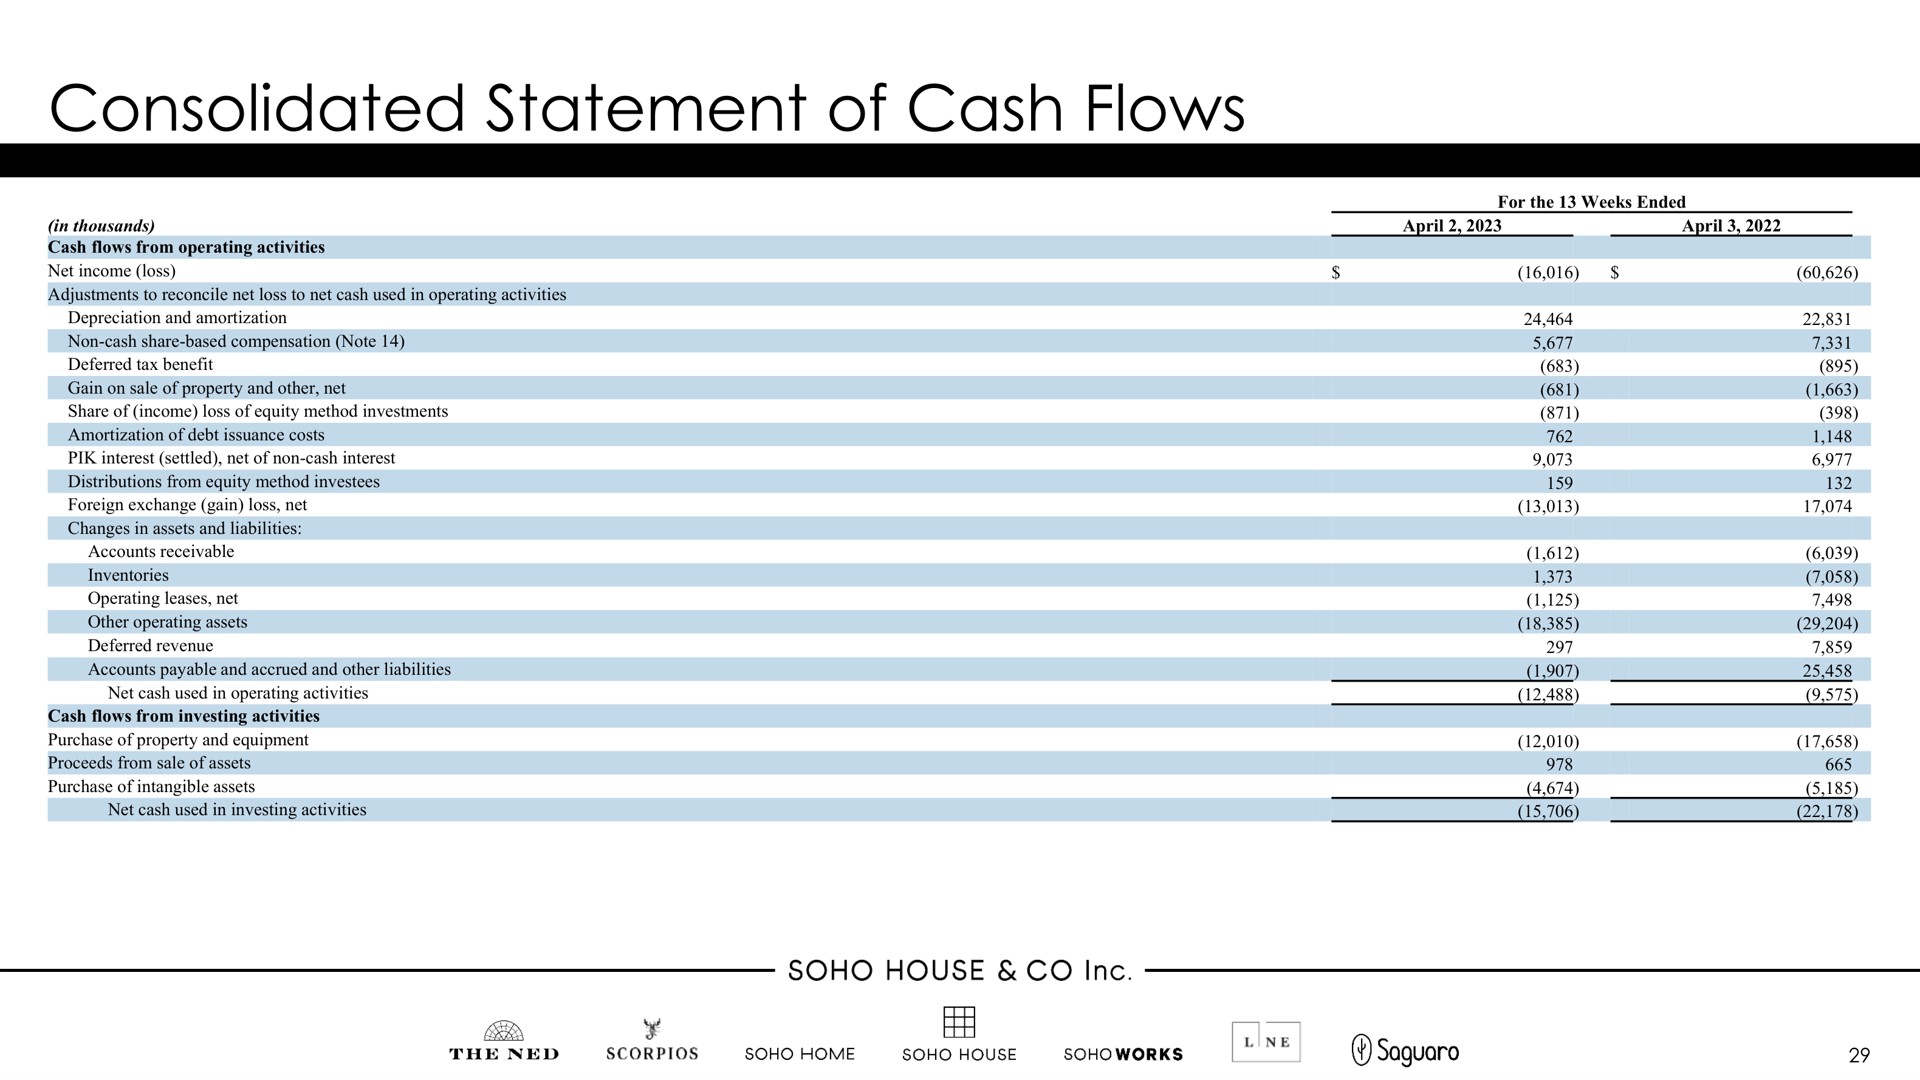 consolidated statement of cash flows nee | Membership Collective Group